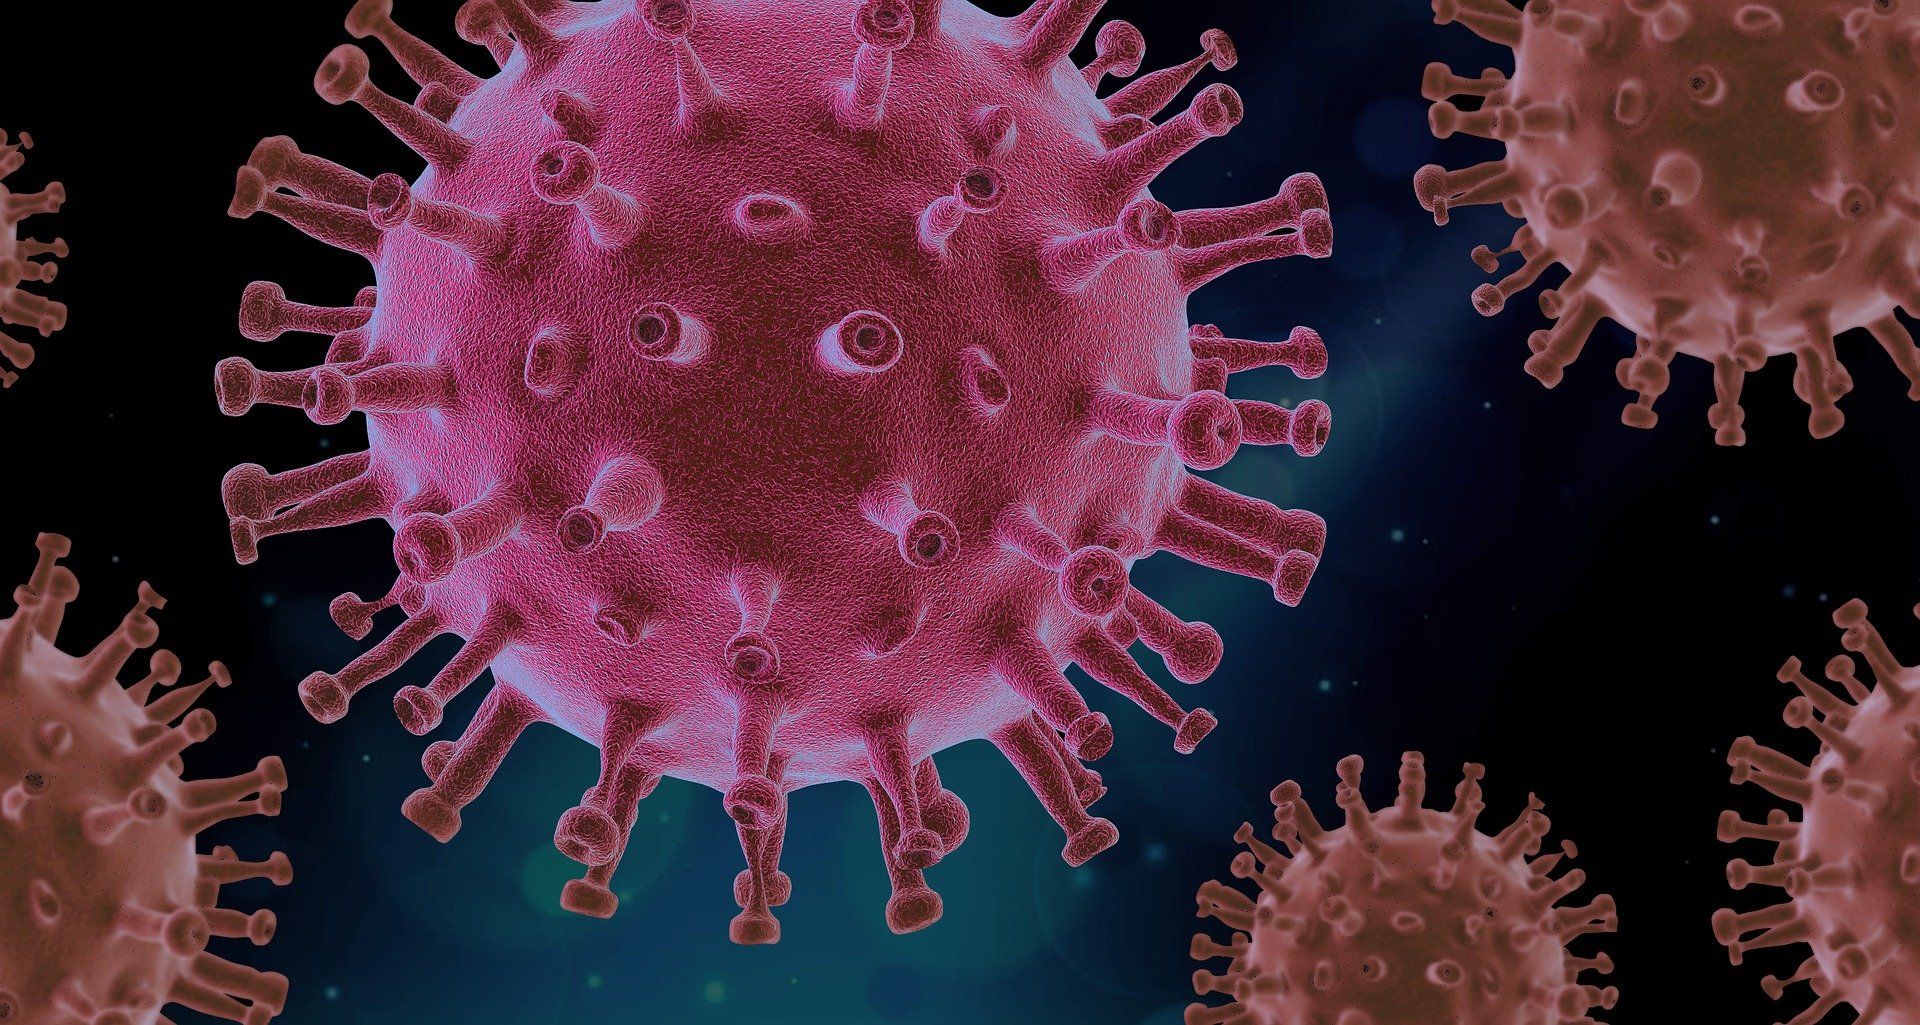 Indian scientists develop new tech to detect COVID-19, HIV, Ebola, and more